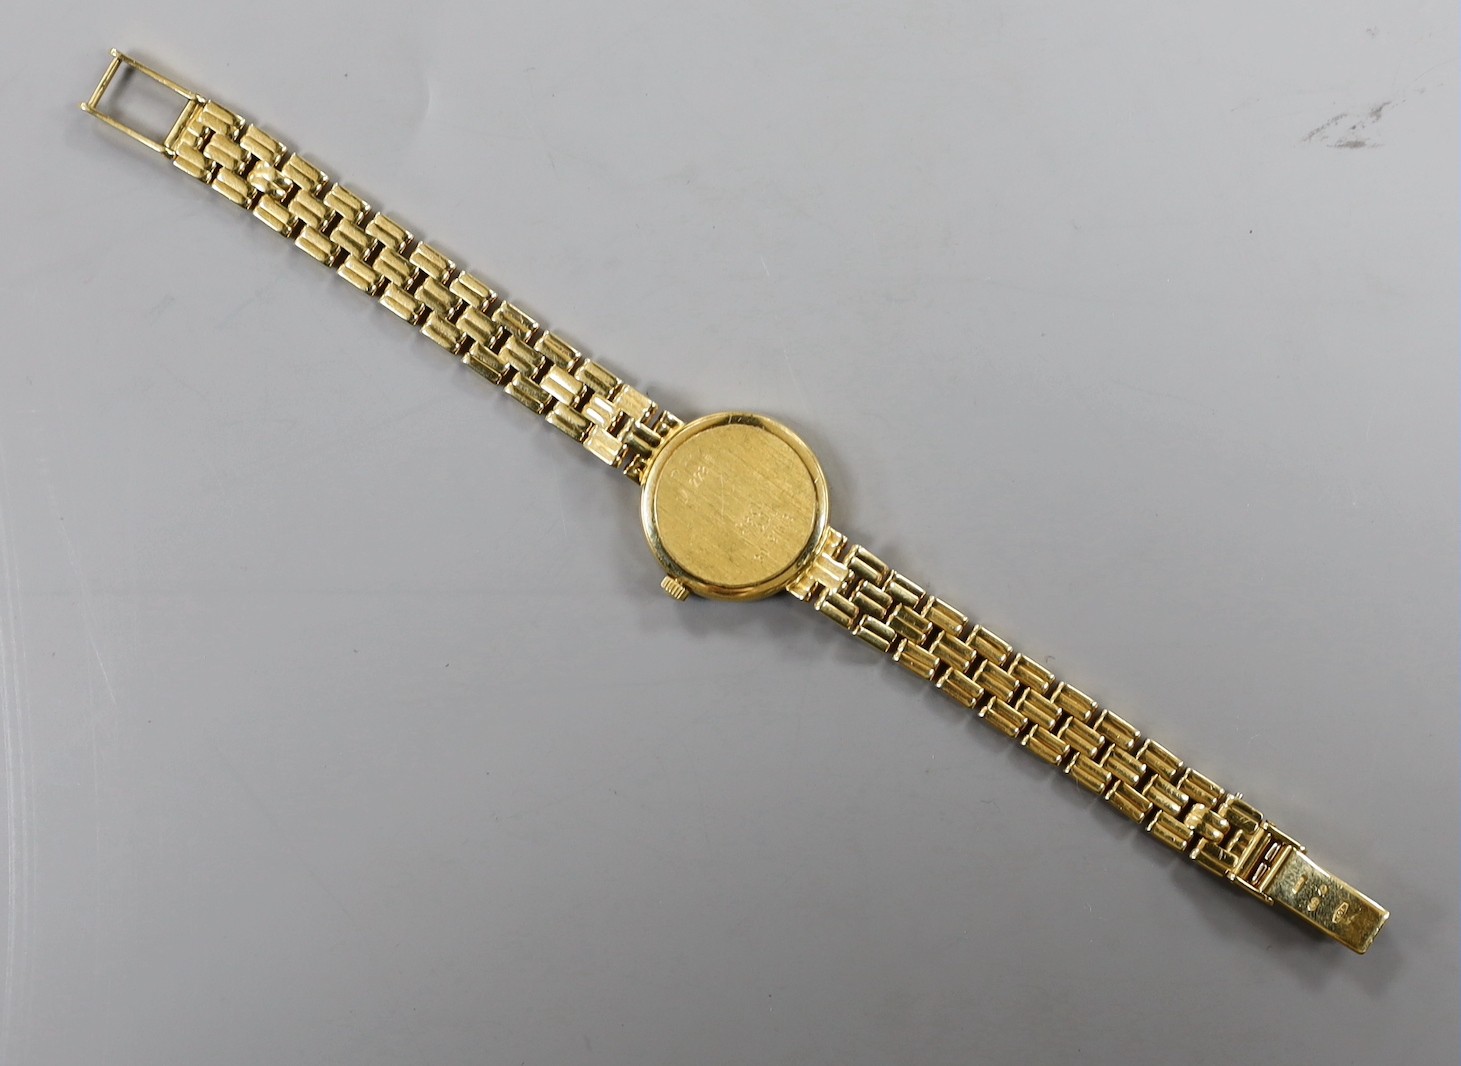 A lady's 18ct gold Longines quartz wrist watch, with mother of pearl dial and diamond chip set bezel, on an 18ct gold Longines bracelet, approx. 16cm, gross weight 33.2 grams, no box or papers.